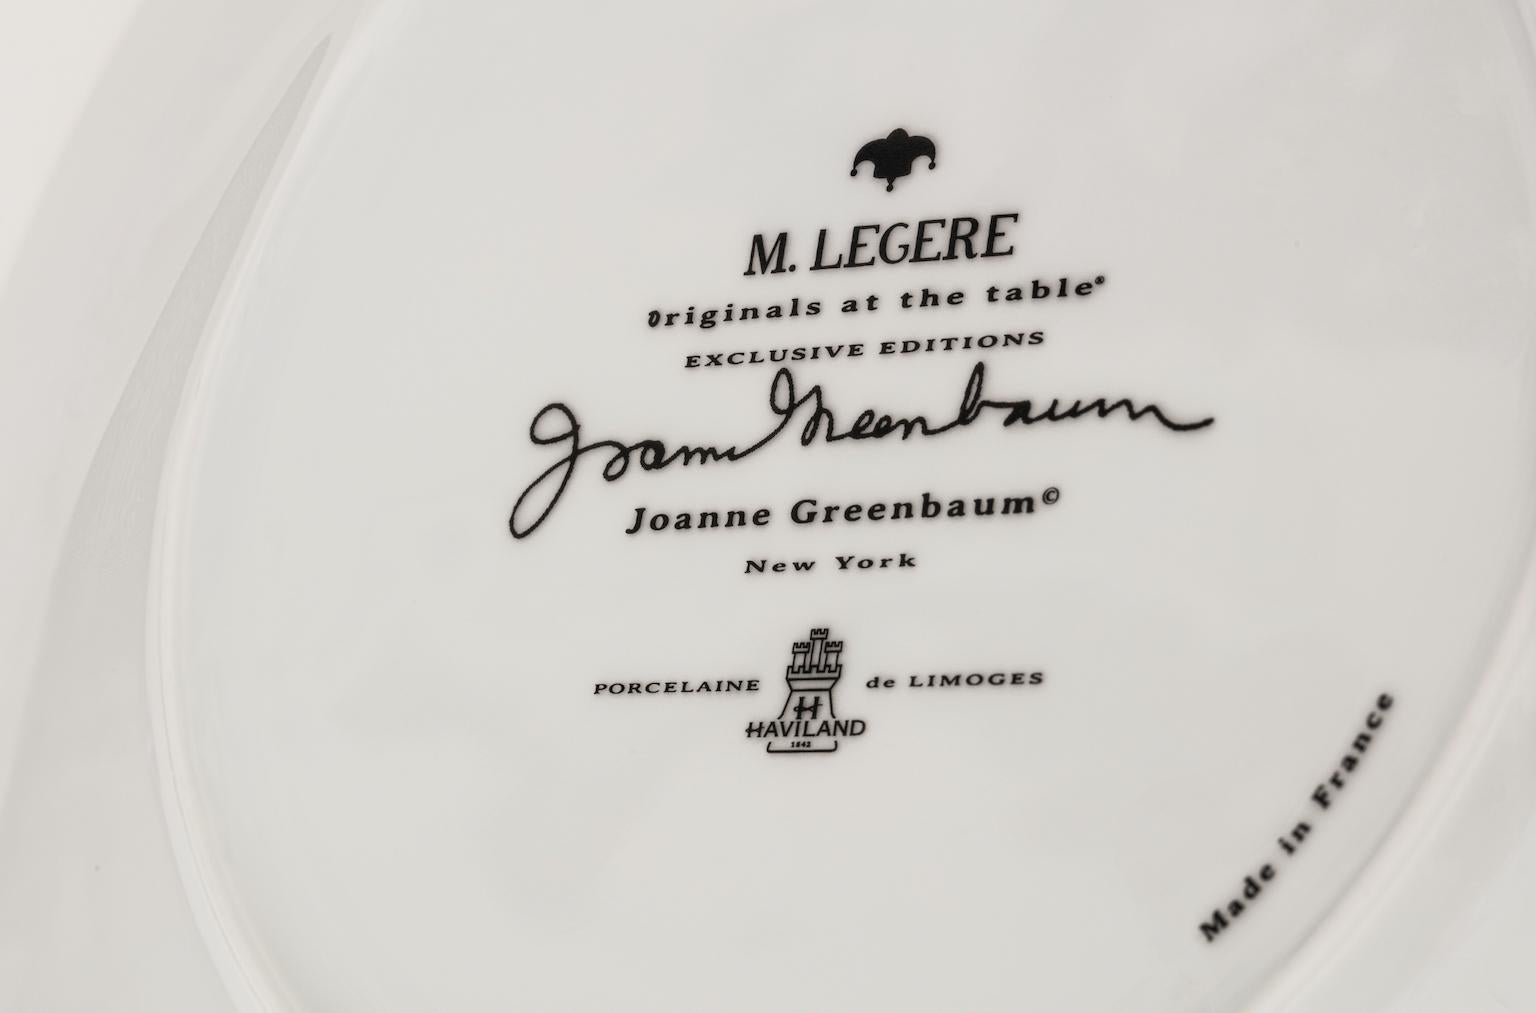 This uniquely styled Limoges white porcelain deep bowl featuring abstract designs in a Delph Blue color was rendered exclusively for M.Legere by NYC female abstract Artist Joanne Greenbaum and is dishwater safe. Haviland, Limoges France's leading